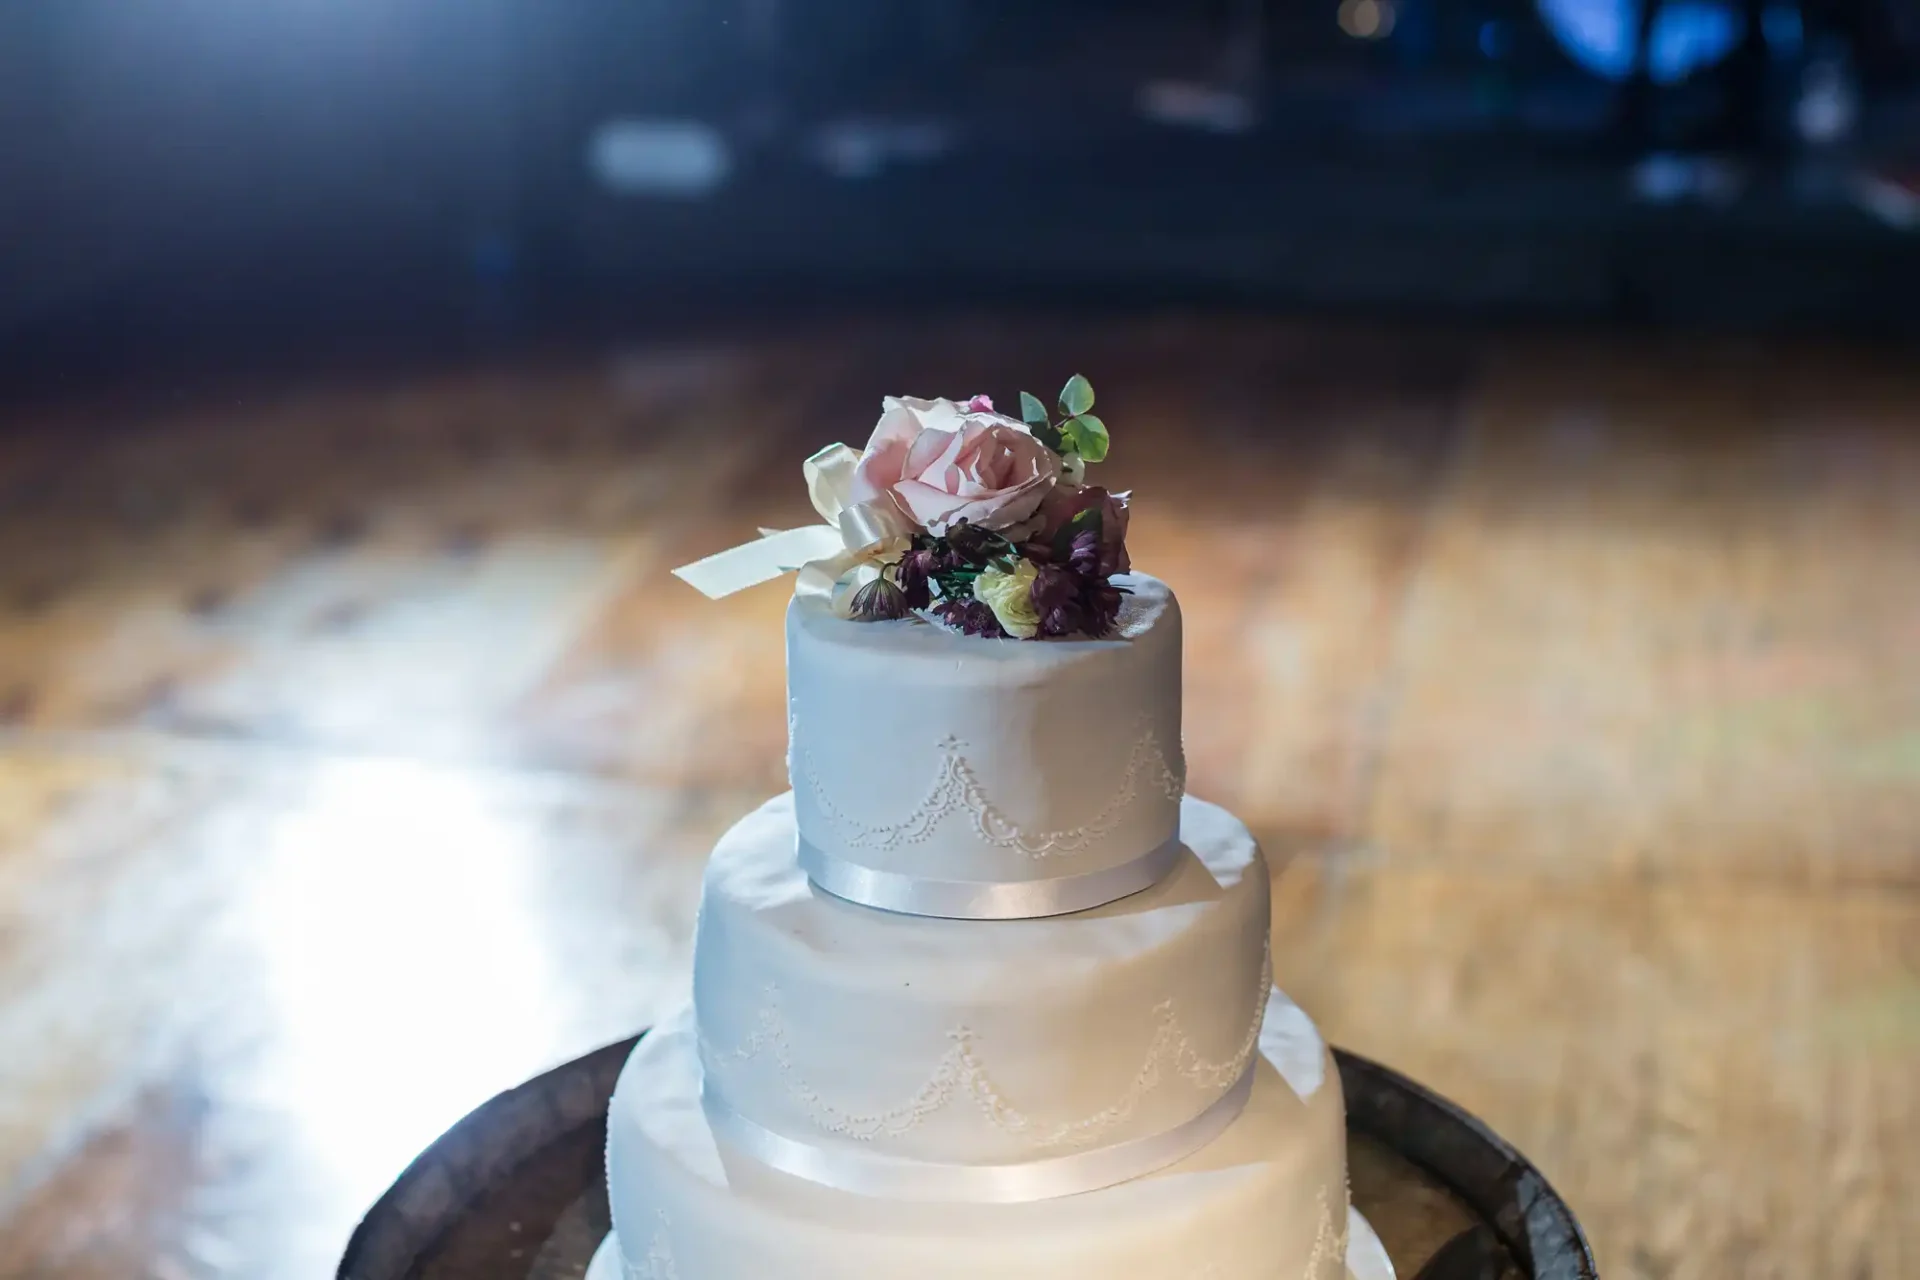 A three-tiered wedding cake with white frosting and floral decorations on top, displayed on a wooden table with a softly lit background.